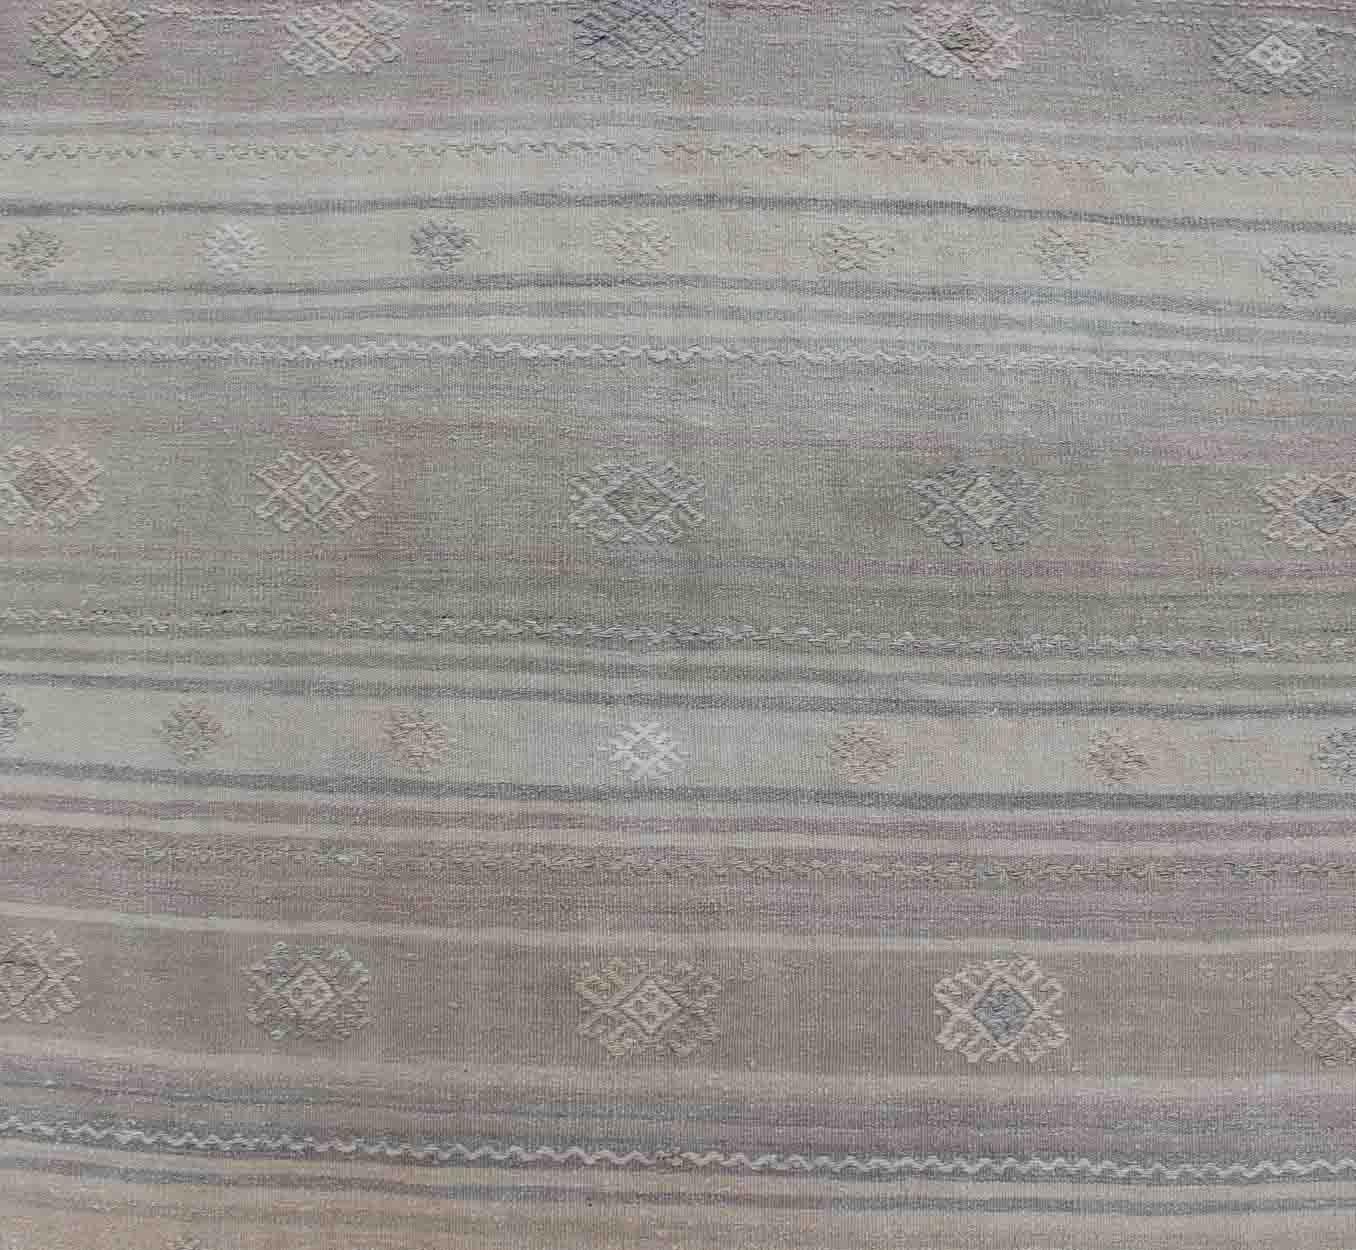 20th Century Vintage Hand Woven Turkish Kilim Runner With Stripes in Gray and Natural Tones For Sale